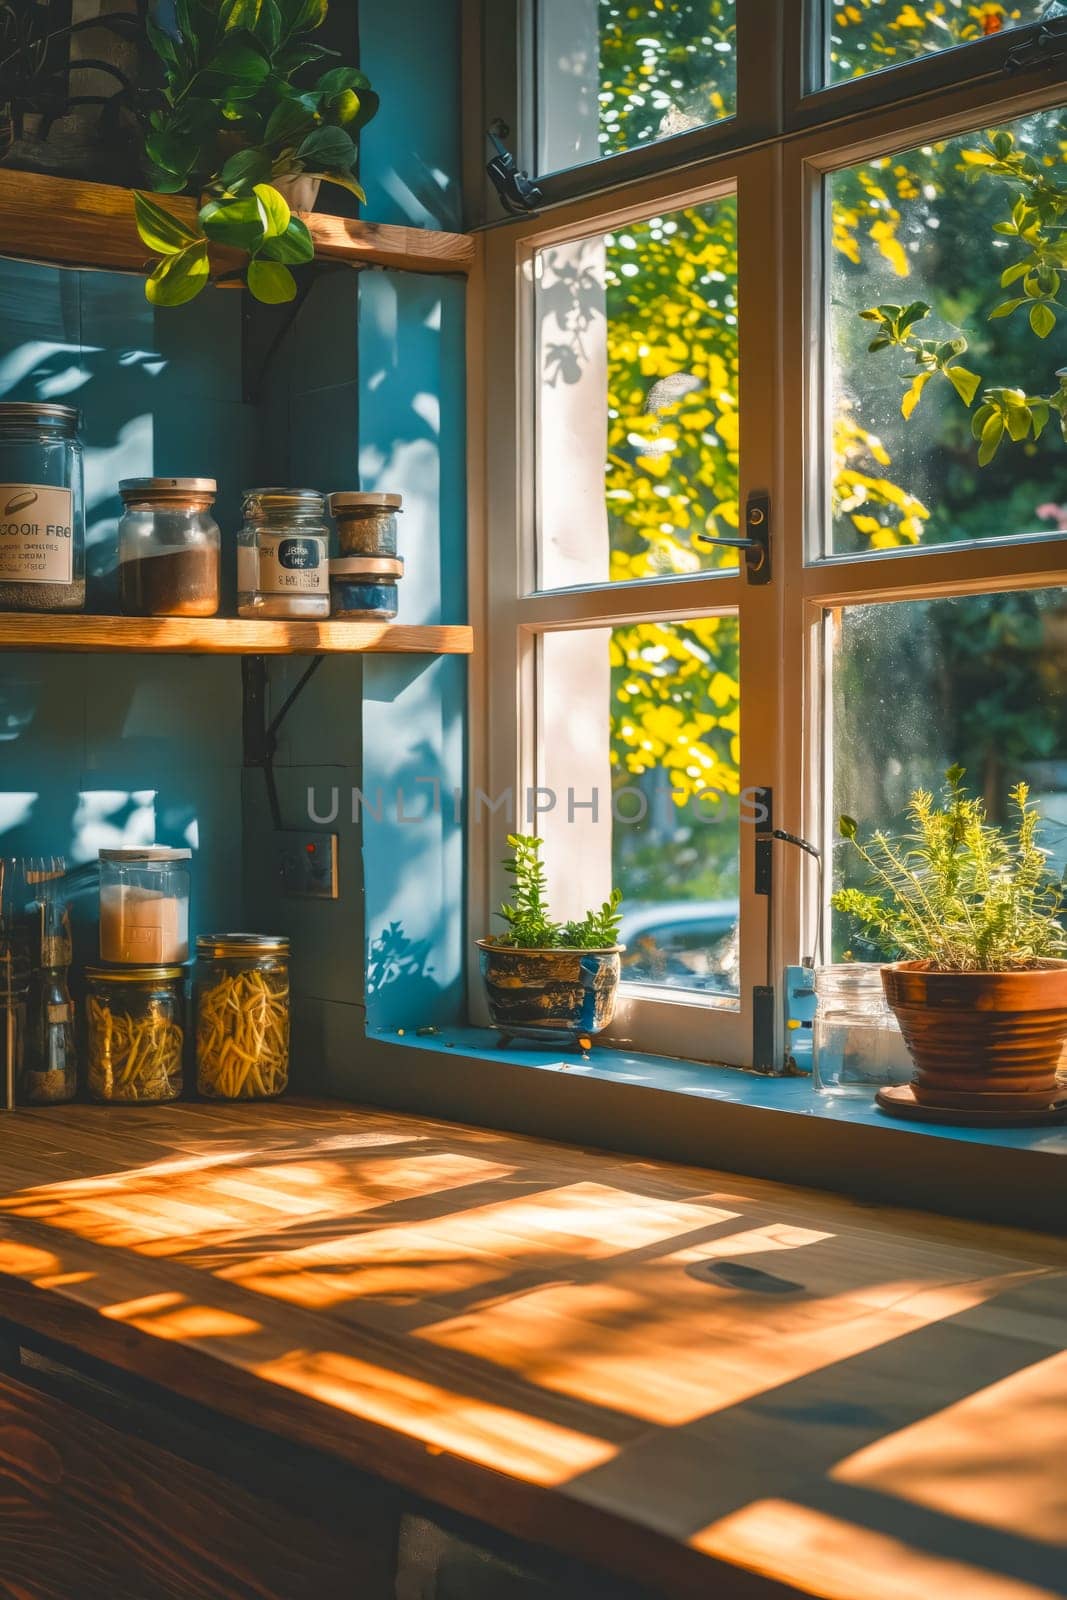 A kitchen window with a view of the outside. The window is open and the sunlight is shining through it. There are potted plants on the windowsill and a few jars on the counter. Generative AI